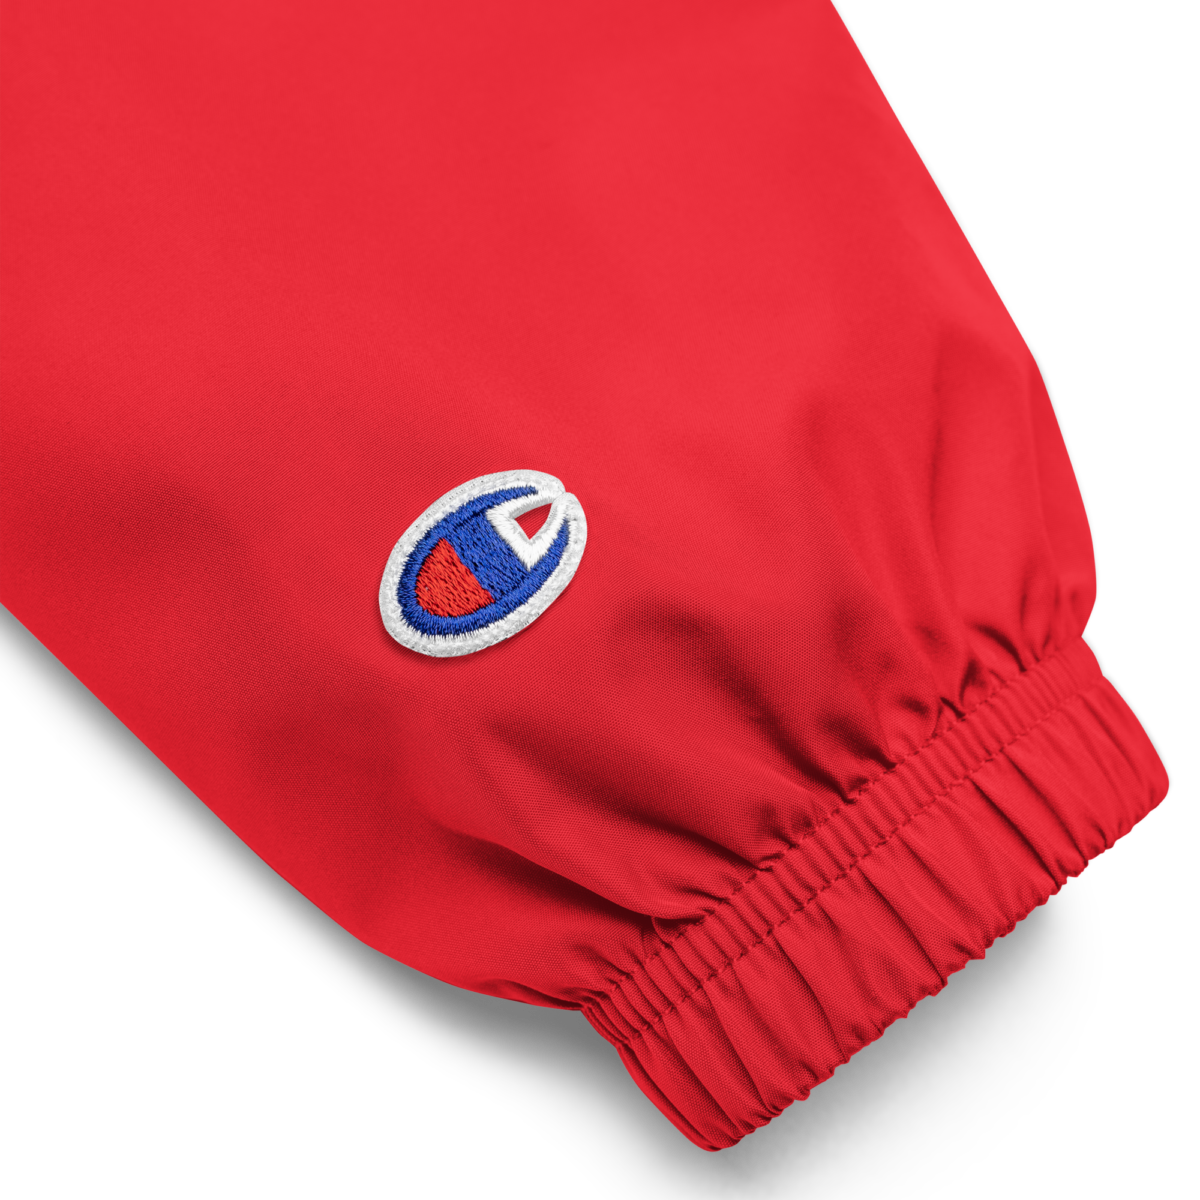 embroidered champion packable jacket scarlet product details 631f42af17d71 - Bitcoin: I'm Buyin' It Champion Packable Jacket